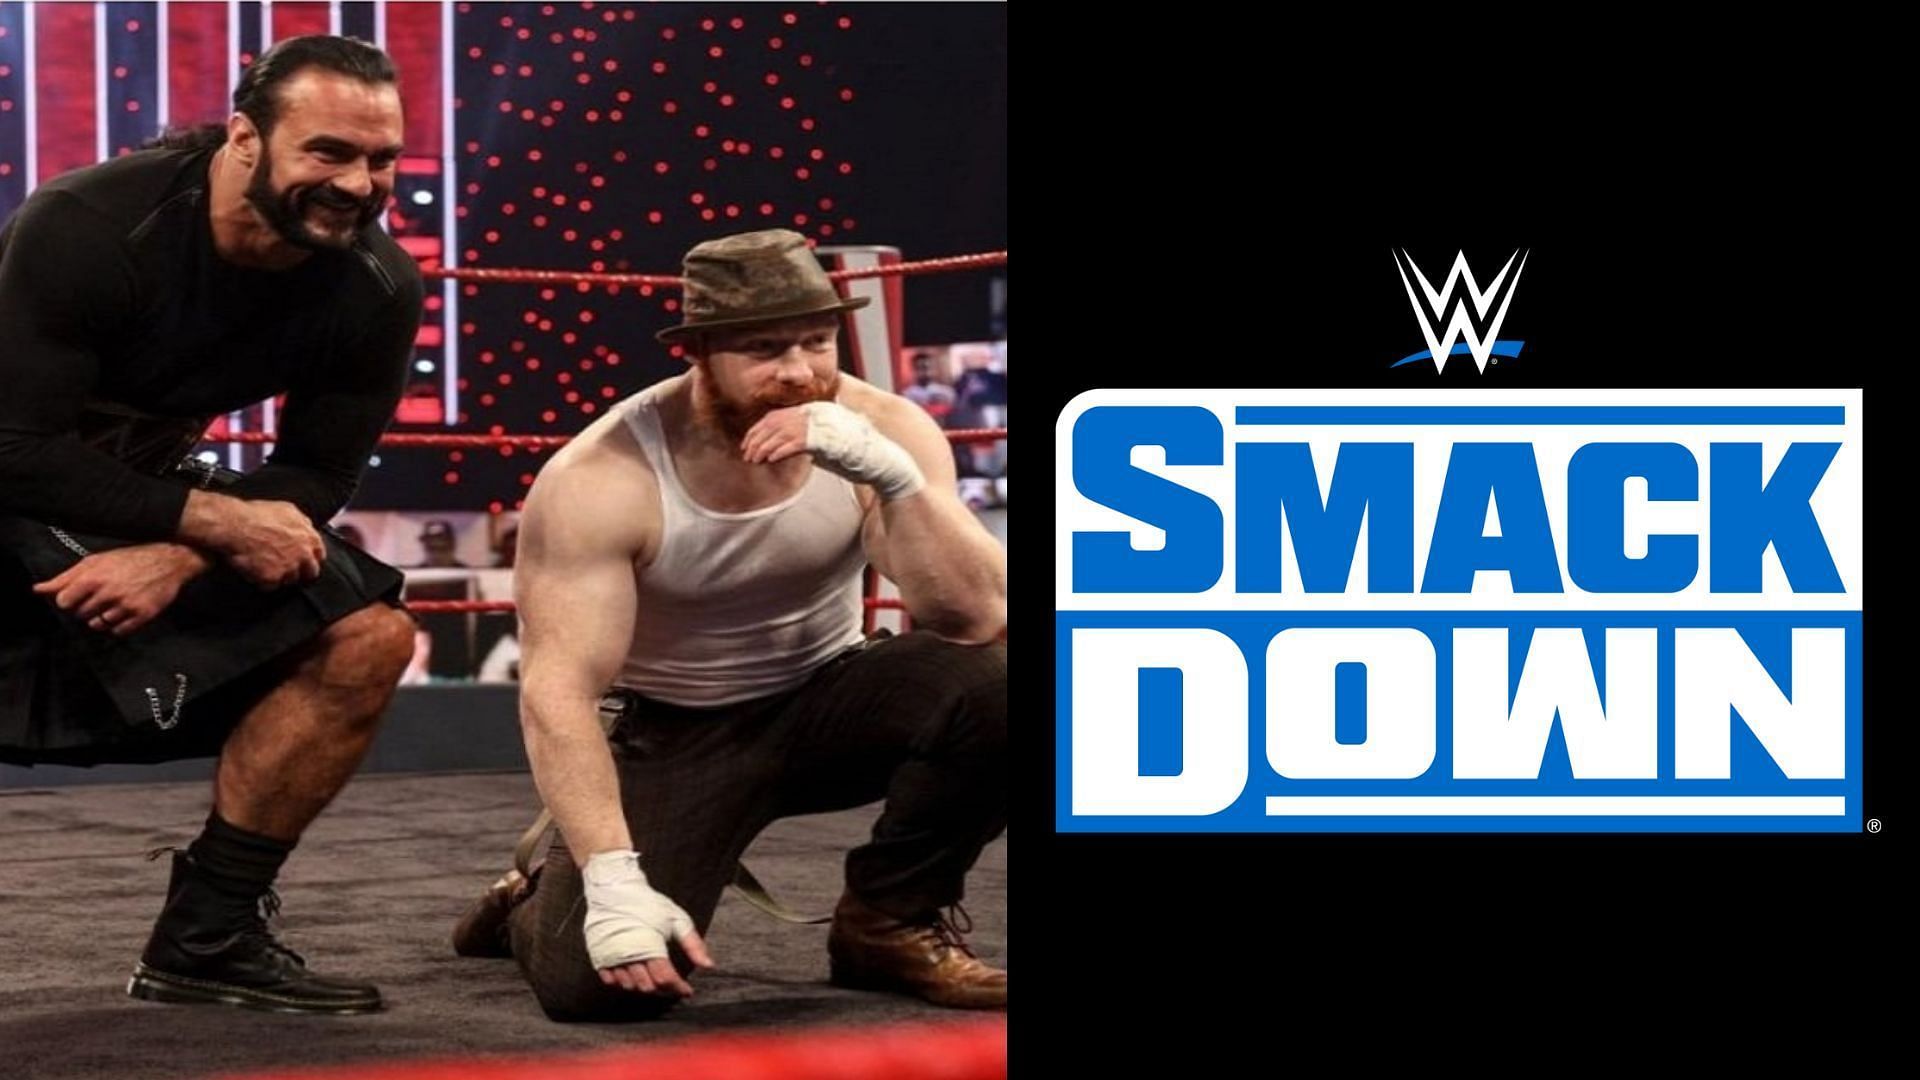 Drew McIntyre and Sheamus has a fight awaiting on WWE SmackDown this Friday